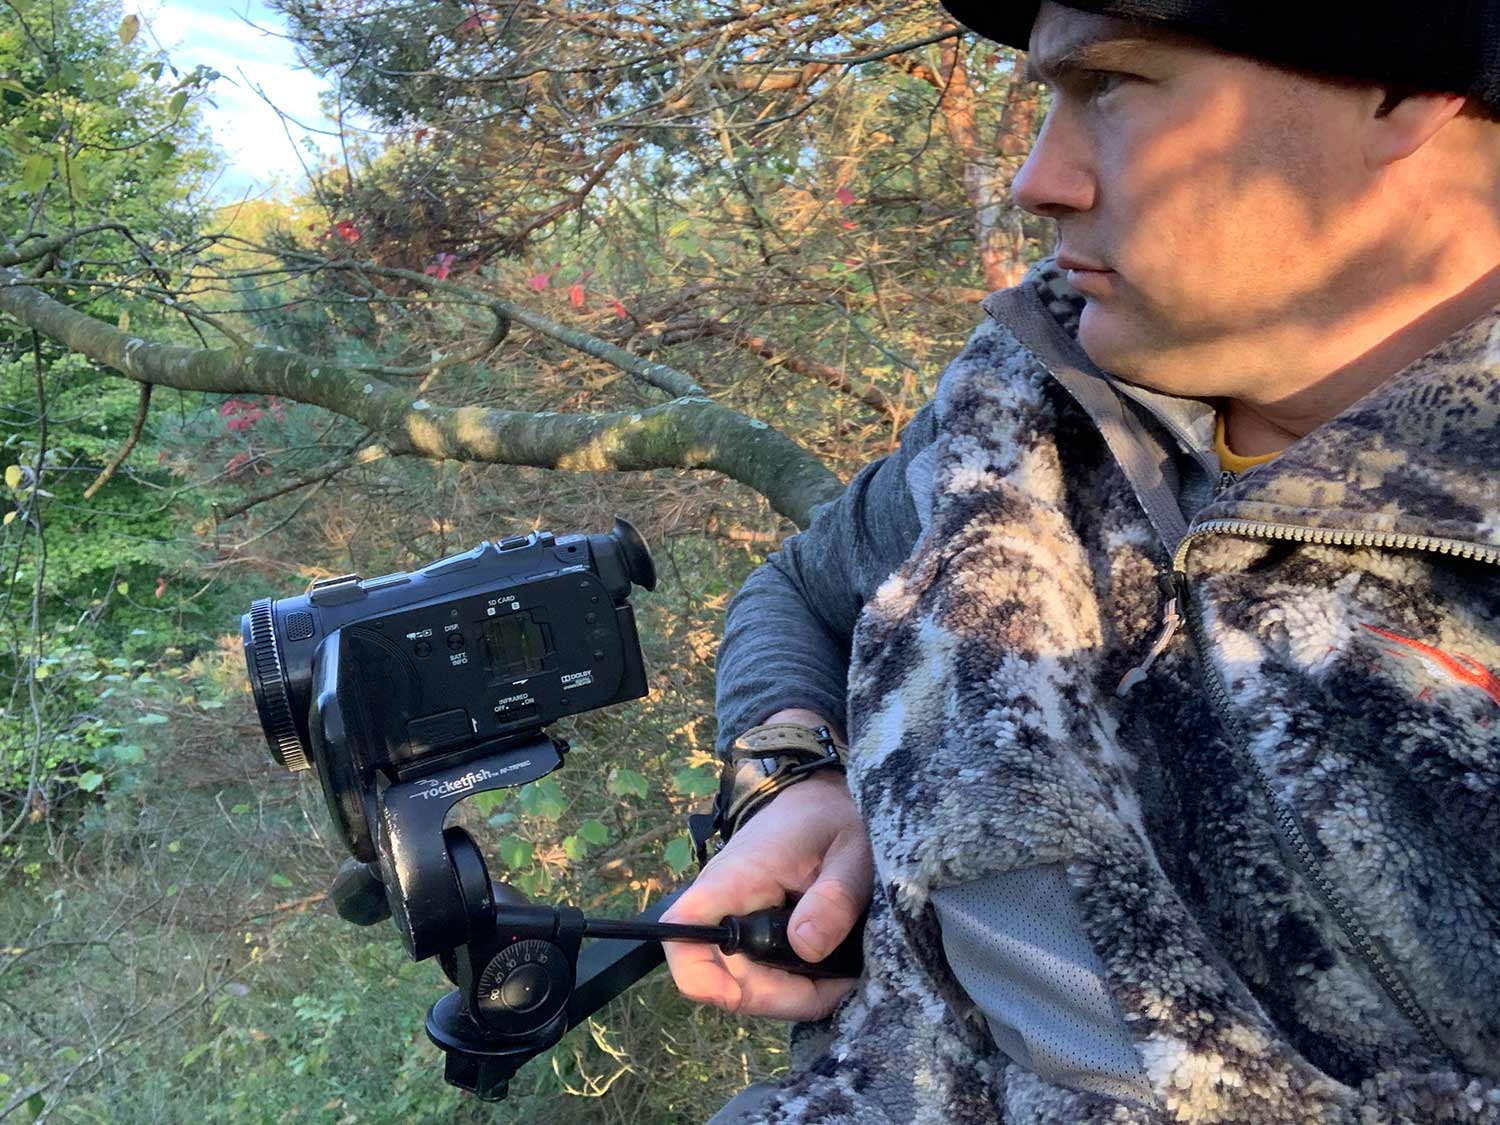 Hunter setting up a camera for a hunt